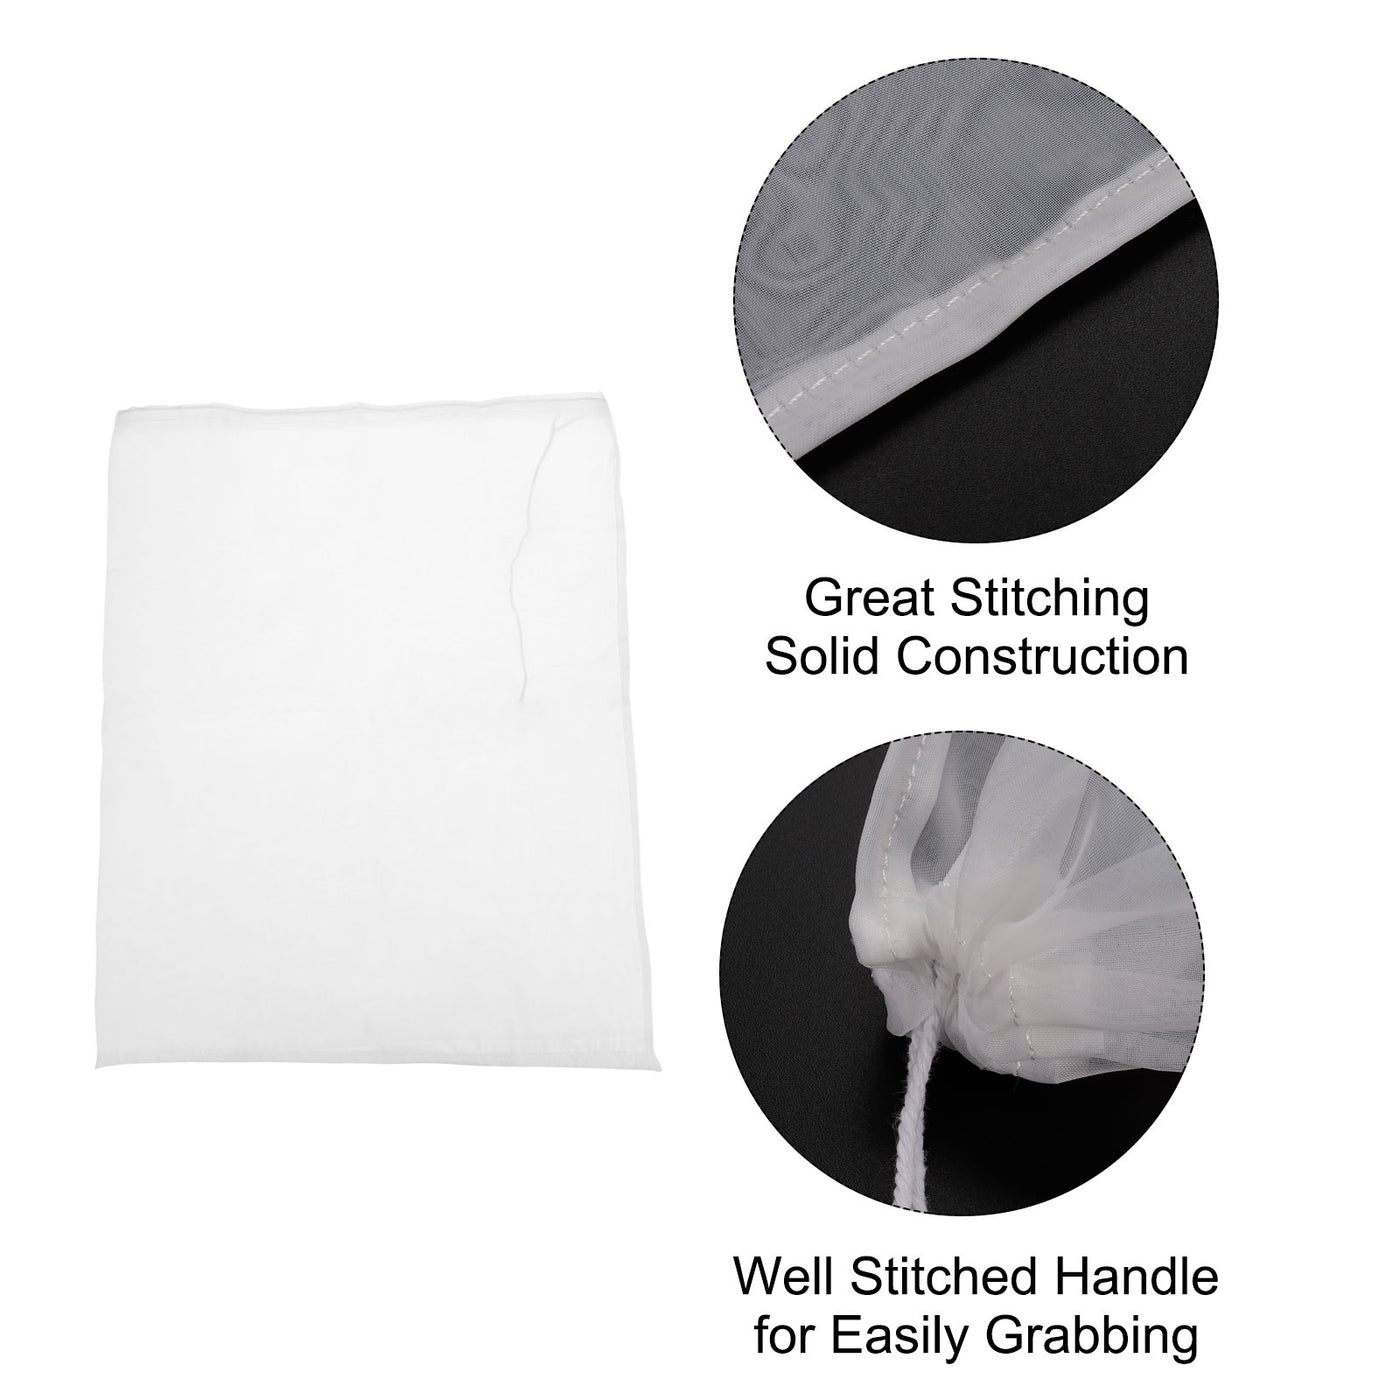 uxcell Uxcell Paint Filter Bag 80 Mesh (17.7"x23.6") Nylon Strainer for Filtering Paint